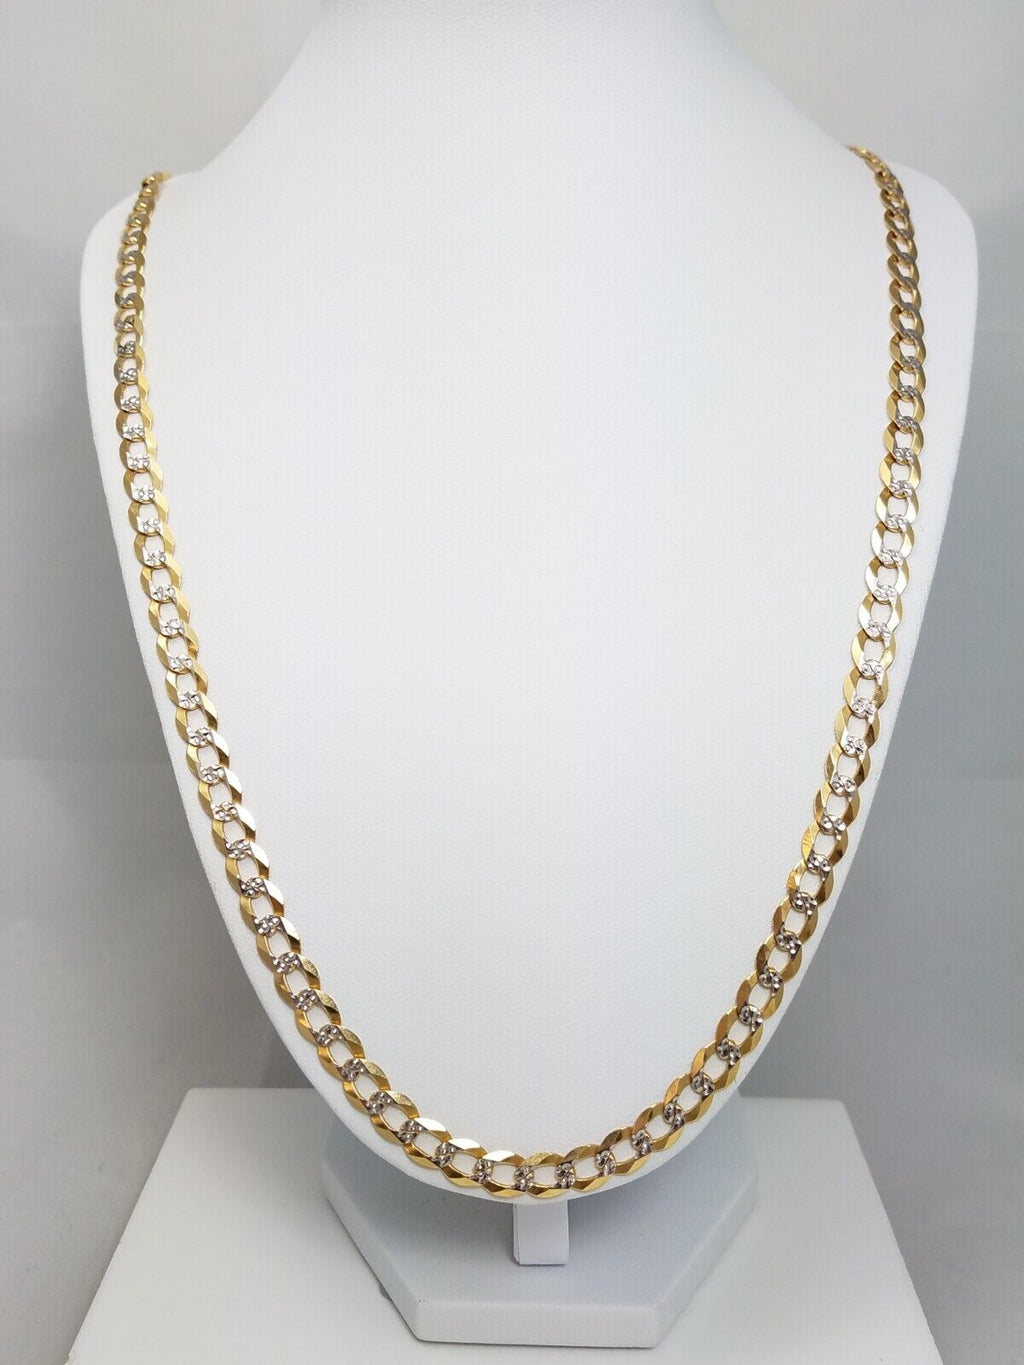 28" 14k Solid Two Tone Gold Diamond Cut Curb/Cuban Chain Necklace